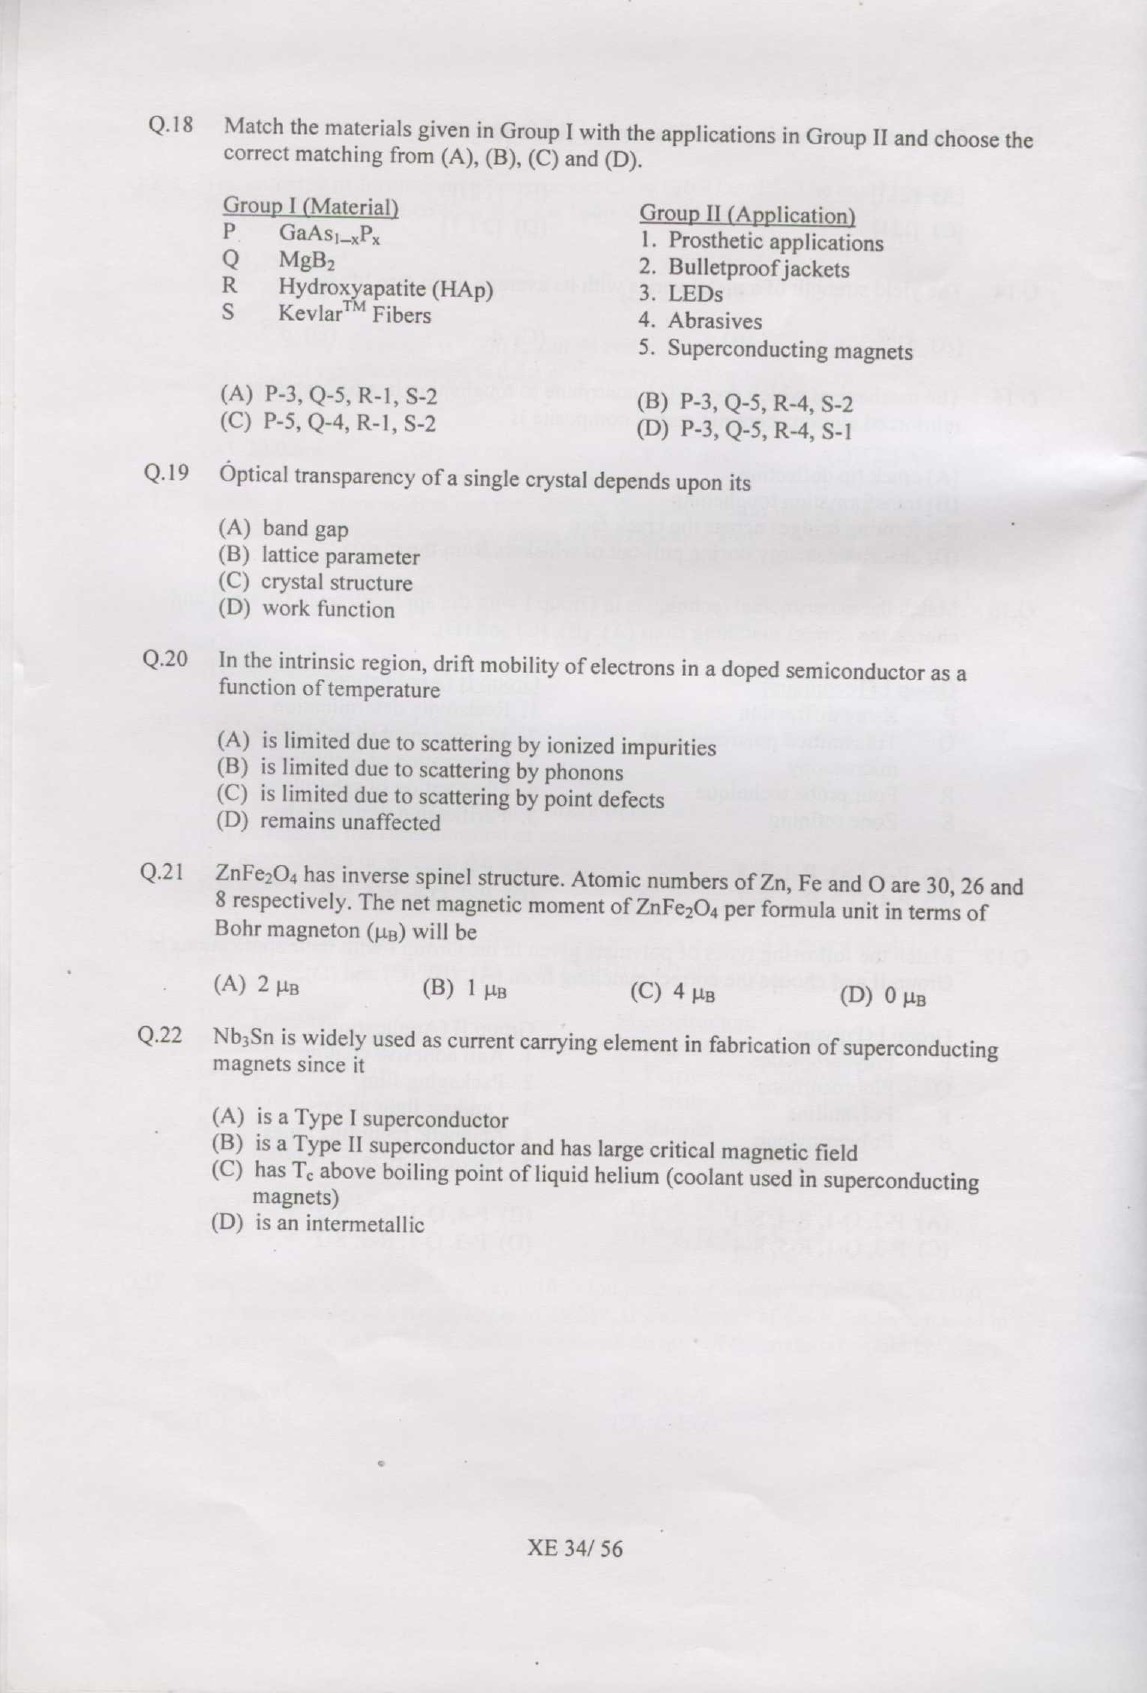 GATE Exam Question Paper 2007 Engineering Sciences 34